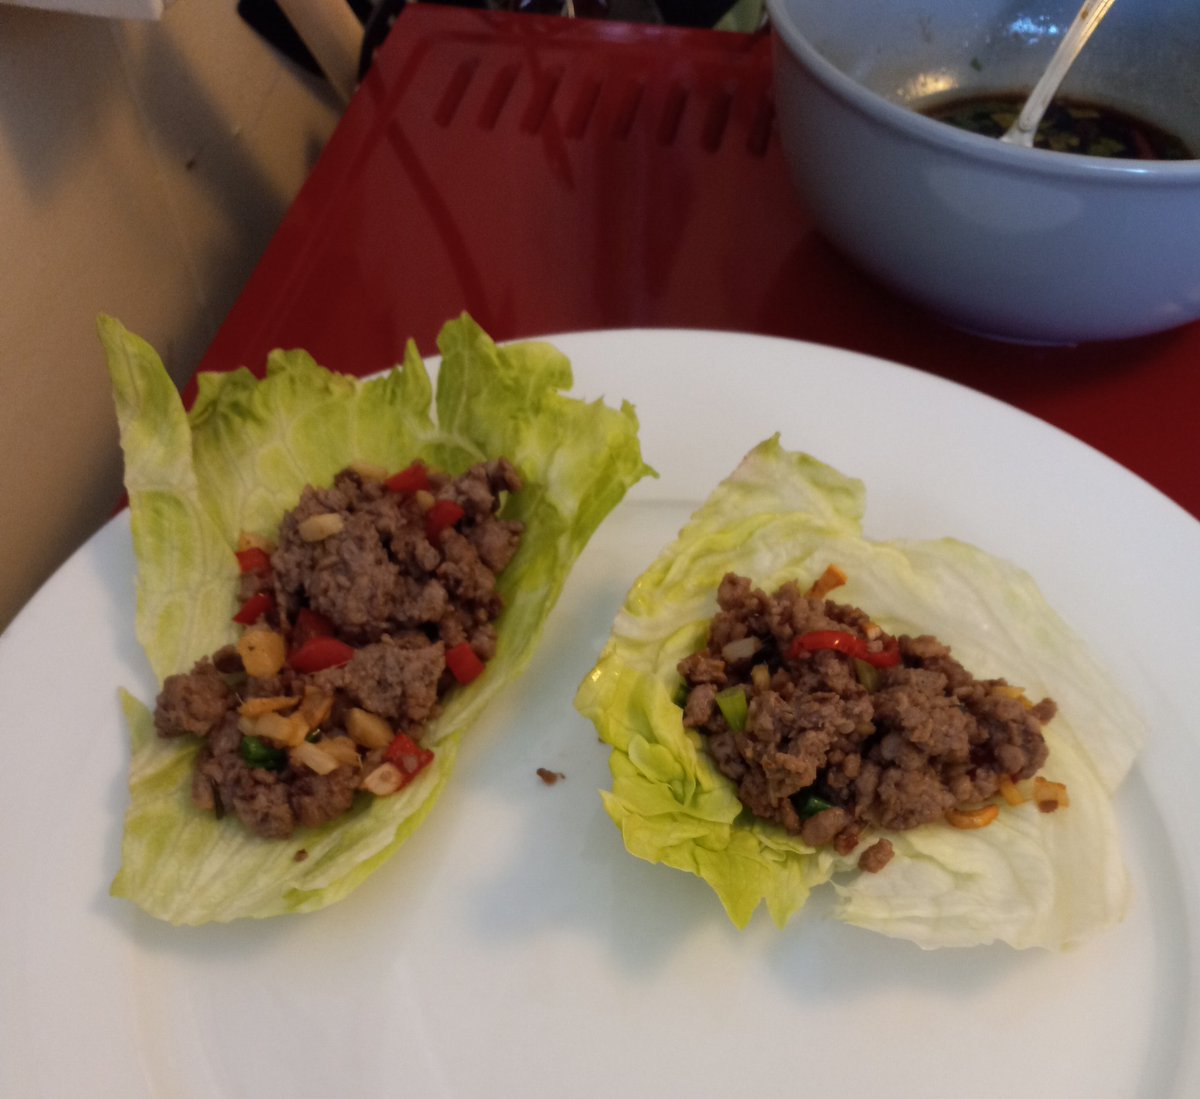 Gordon Ramsay's Lettuce Wraps made with Impossible Ground Beef Substitute @ImpossibleFoods.  I also made with the beef/pork blend for my roommate.  The Impossible Ground Beef Substitute was waaaay better! https://t.co/x3rJS94UAl